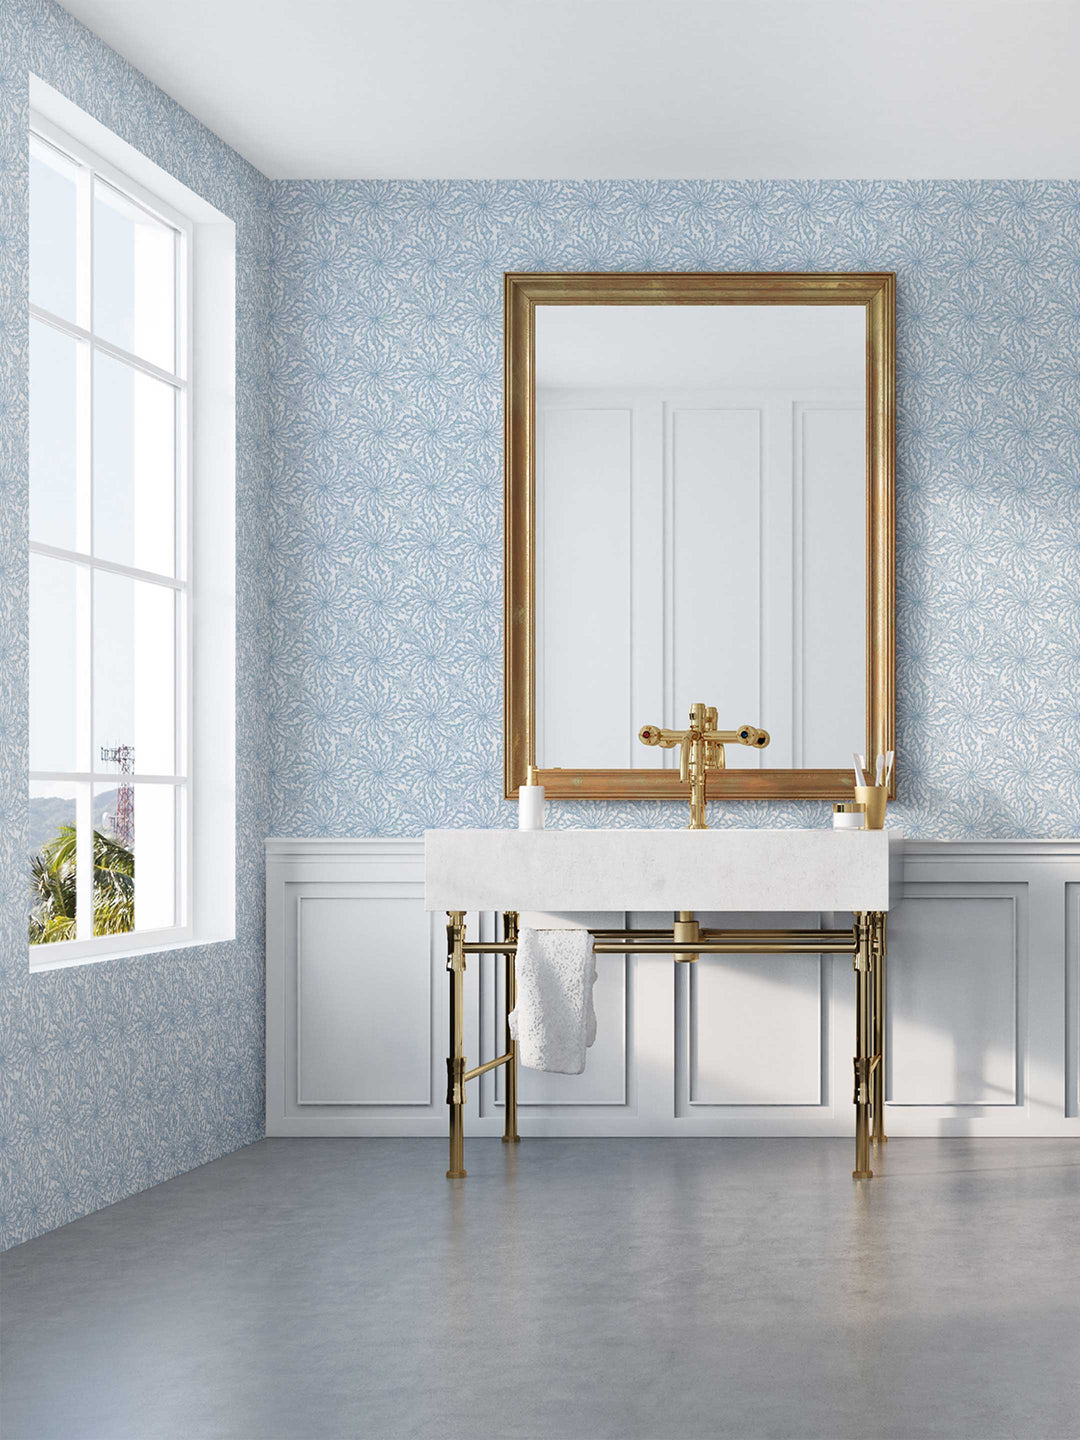 A bathroom wallpapered in a pale blue and white coral patterned wallpaper  - Coral Haze by Milola Design